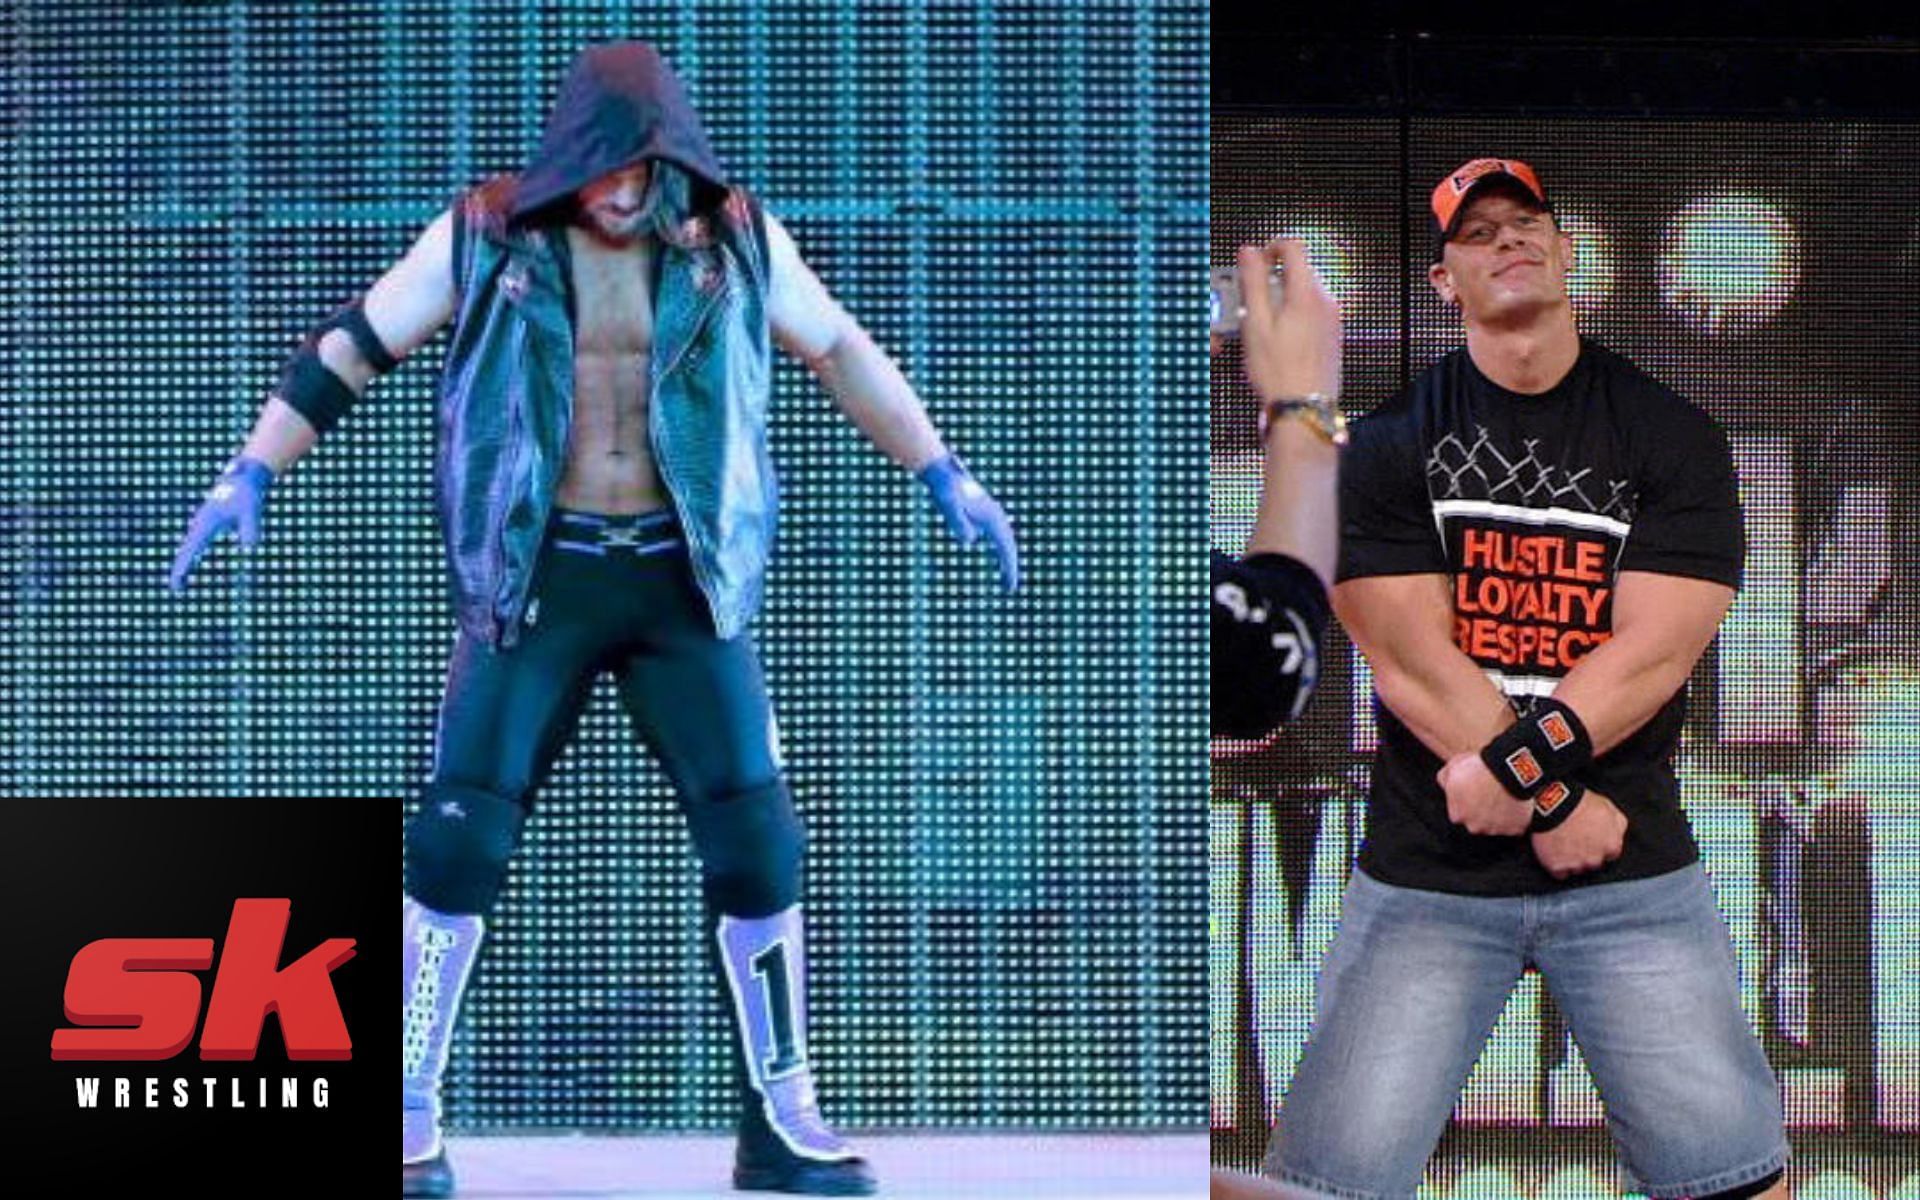 A Phenomenal Rumble debut by AJ Styles in 2016, as the fans welcomed John Cena back in 2008!